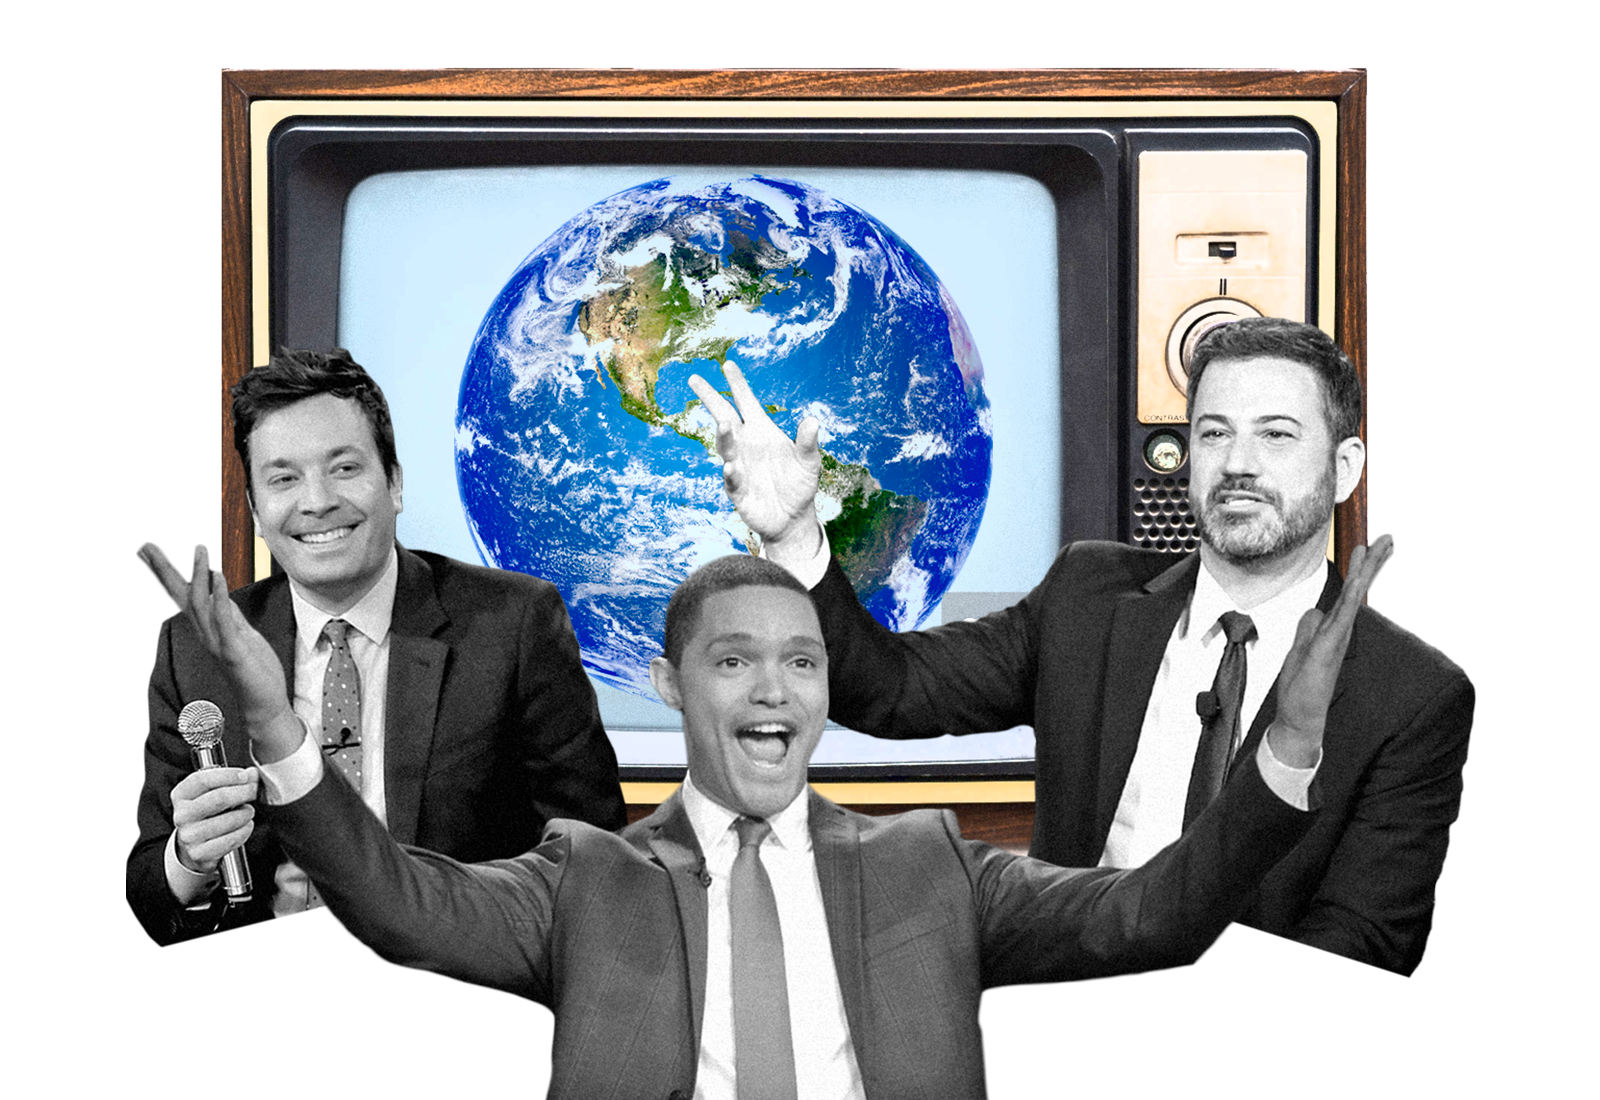 A TV with Earth on it, Jimmy Fallon, Trevor Noah, and Jimmy Kimmel in foreground